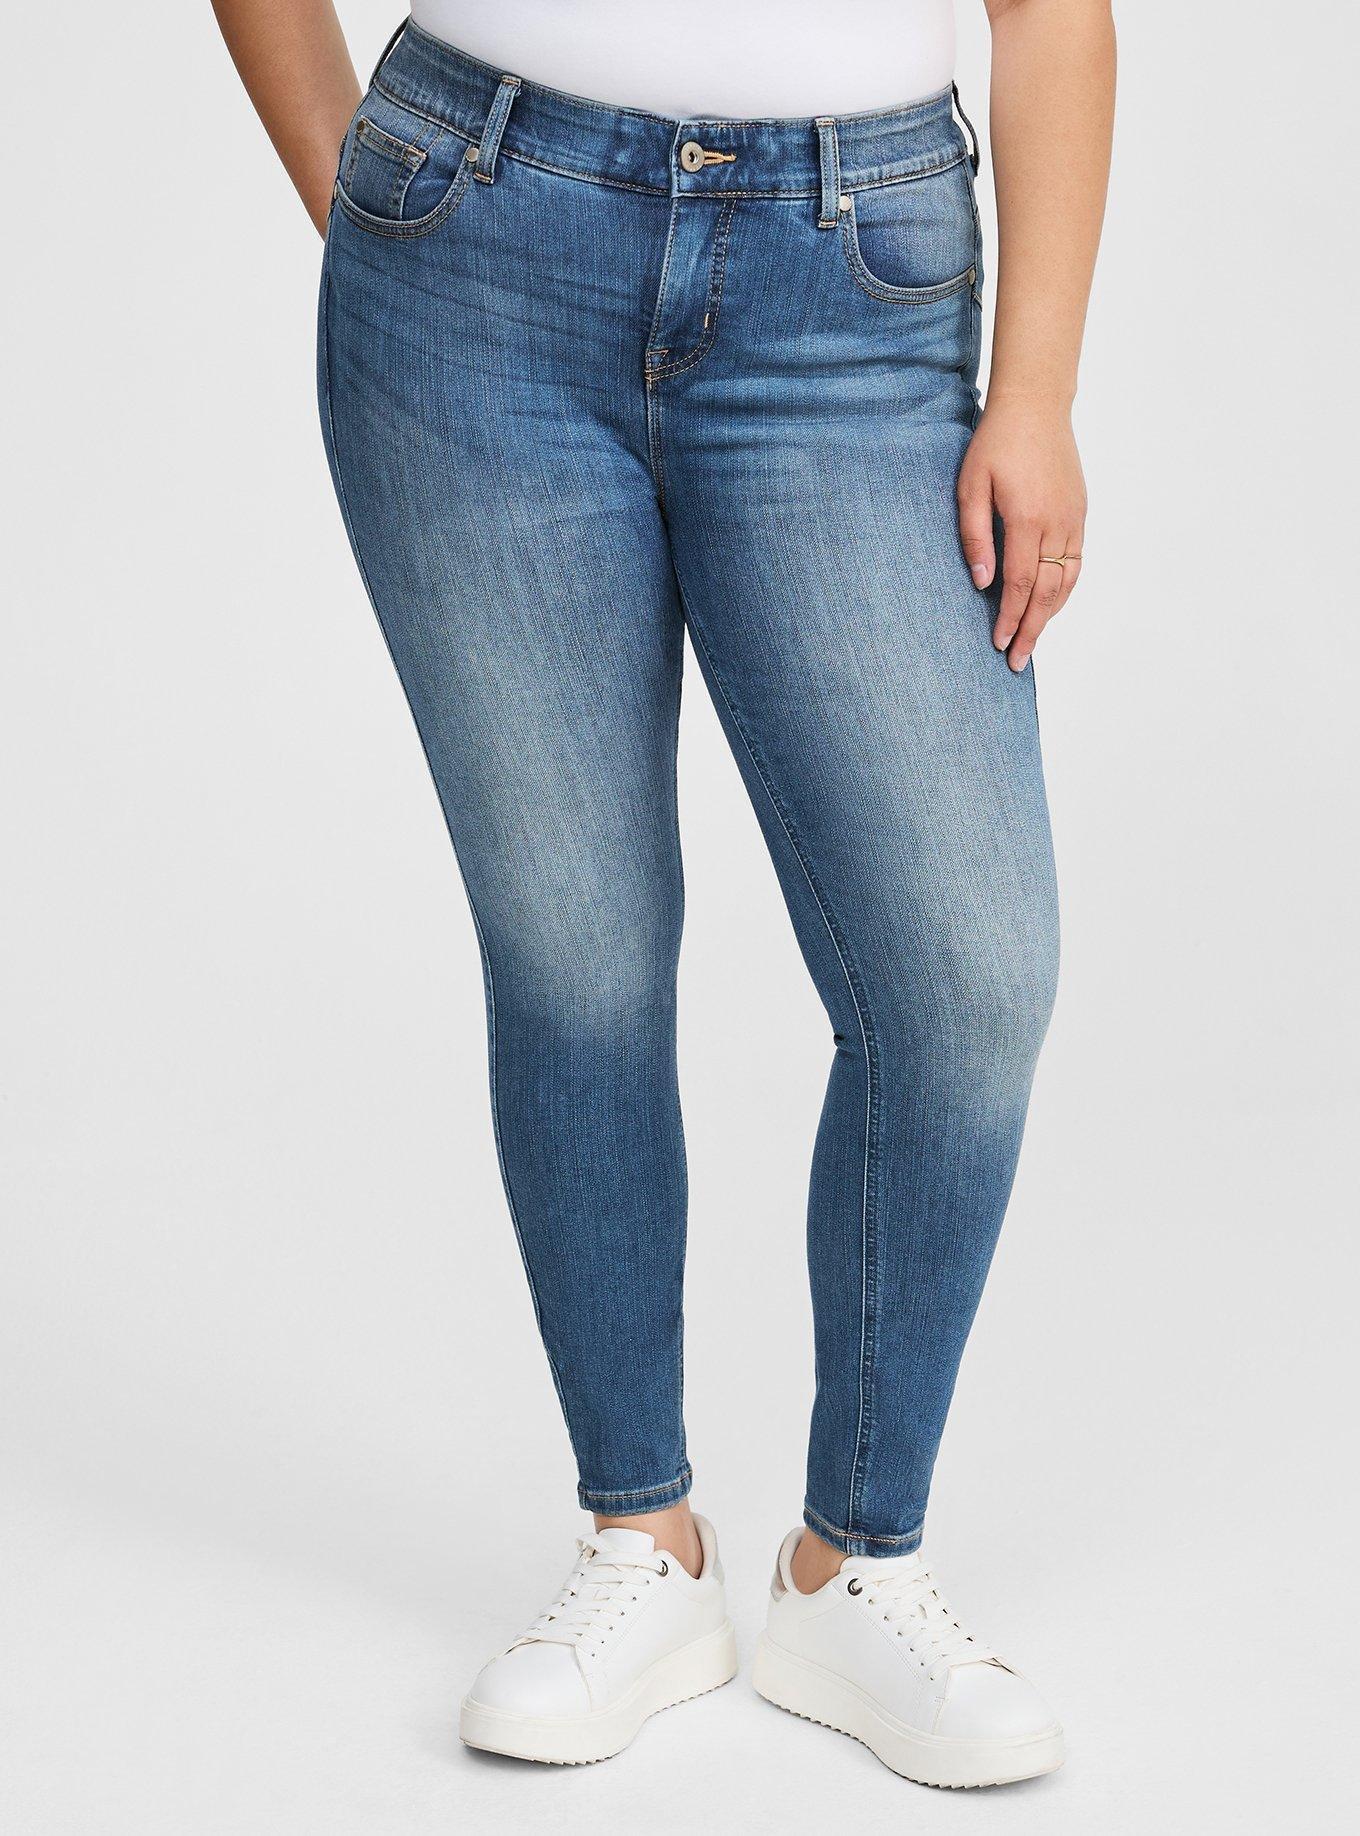 Torrid Maternity Jeans Go To Size 30, And It's About Time!